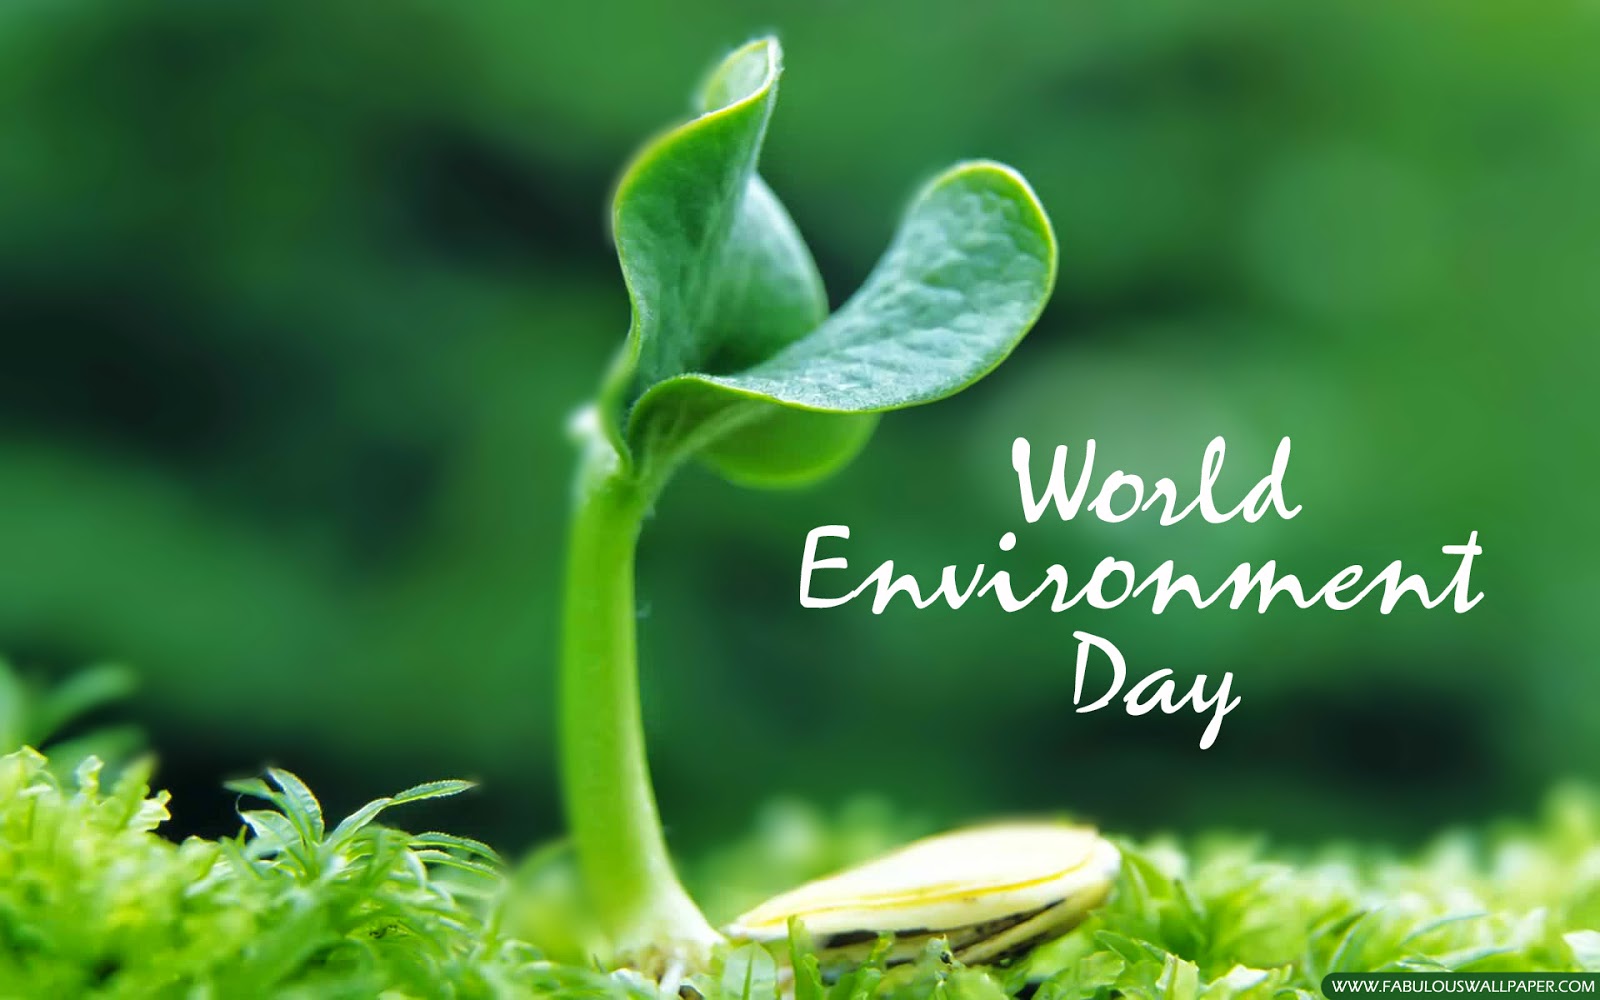 June 5th, World Environment Day